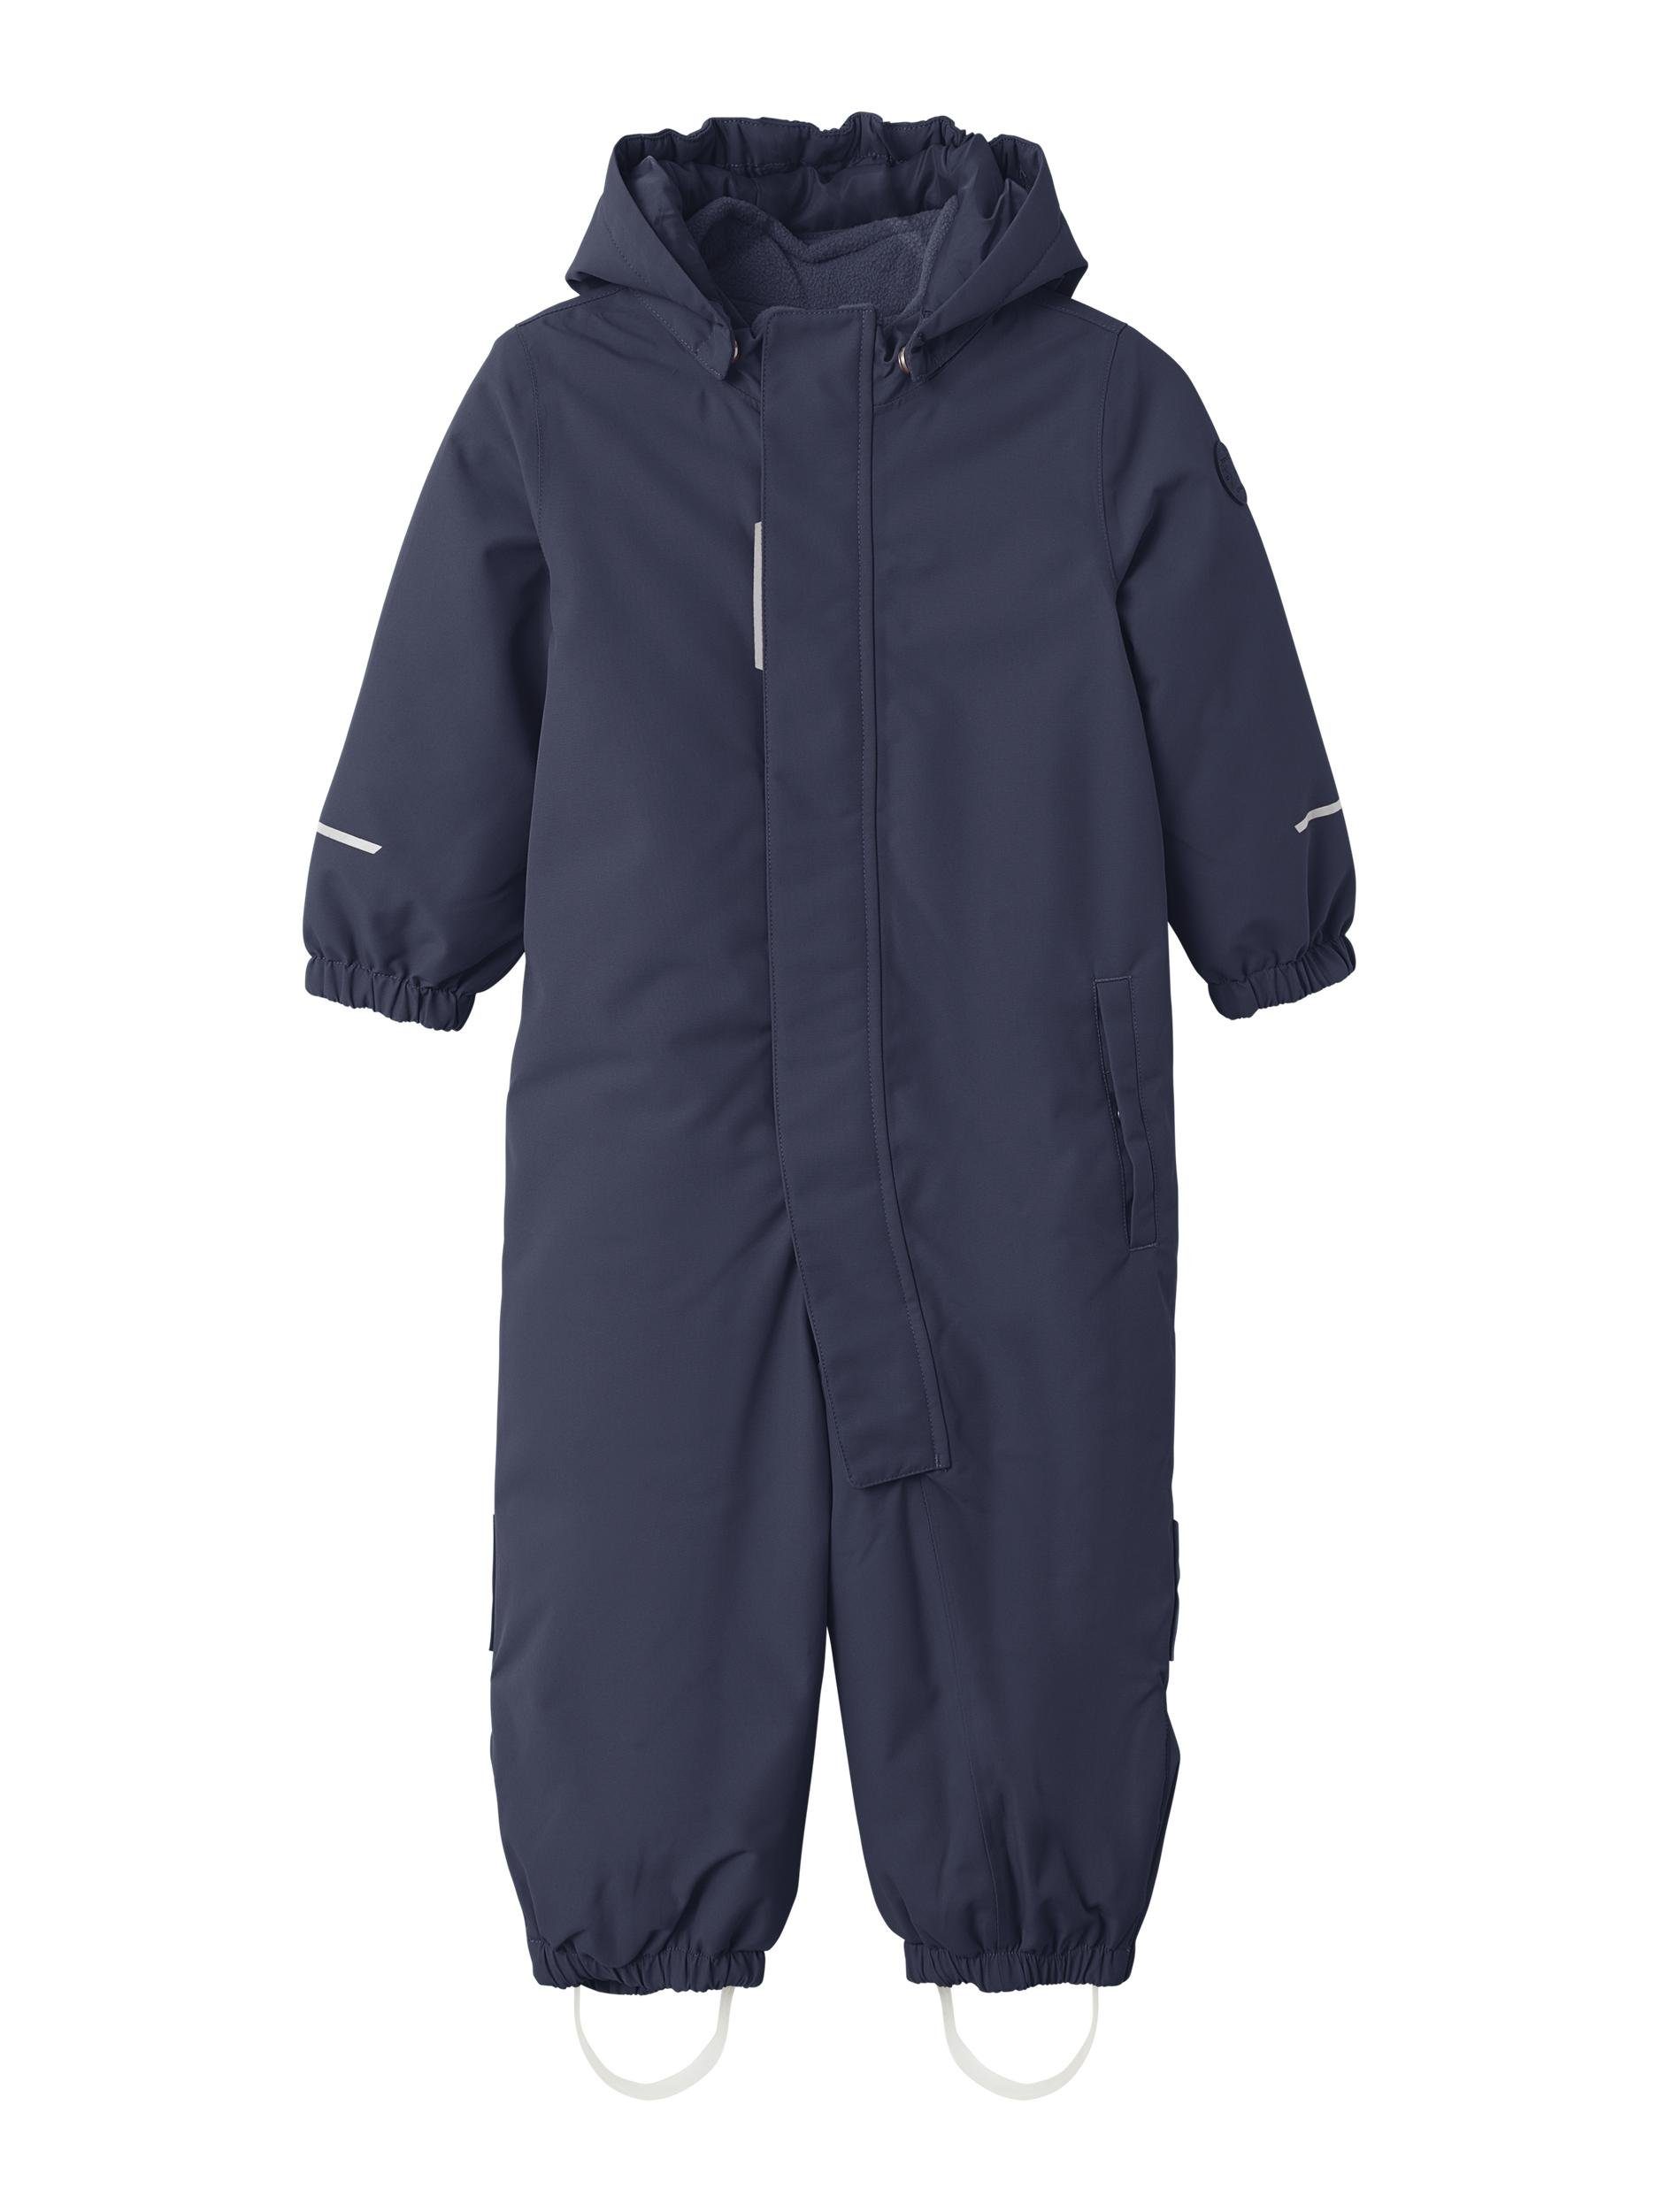 SOLID NOOS NMNSNOW10 Schneeoverall 1FO sapphire dark It Name SUIT